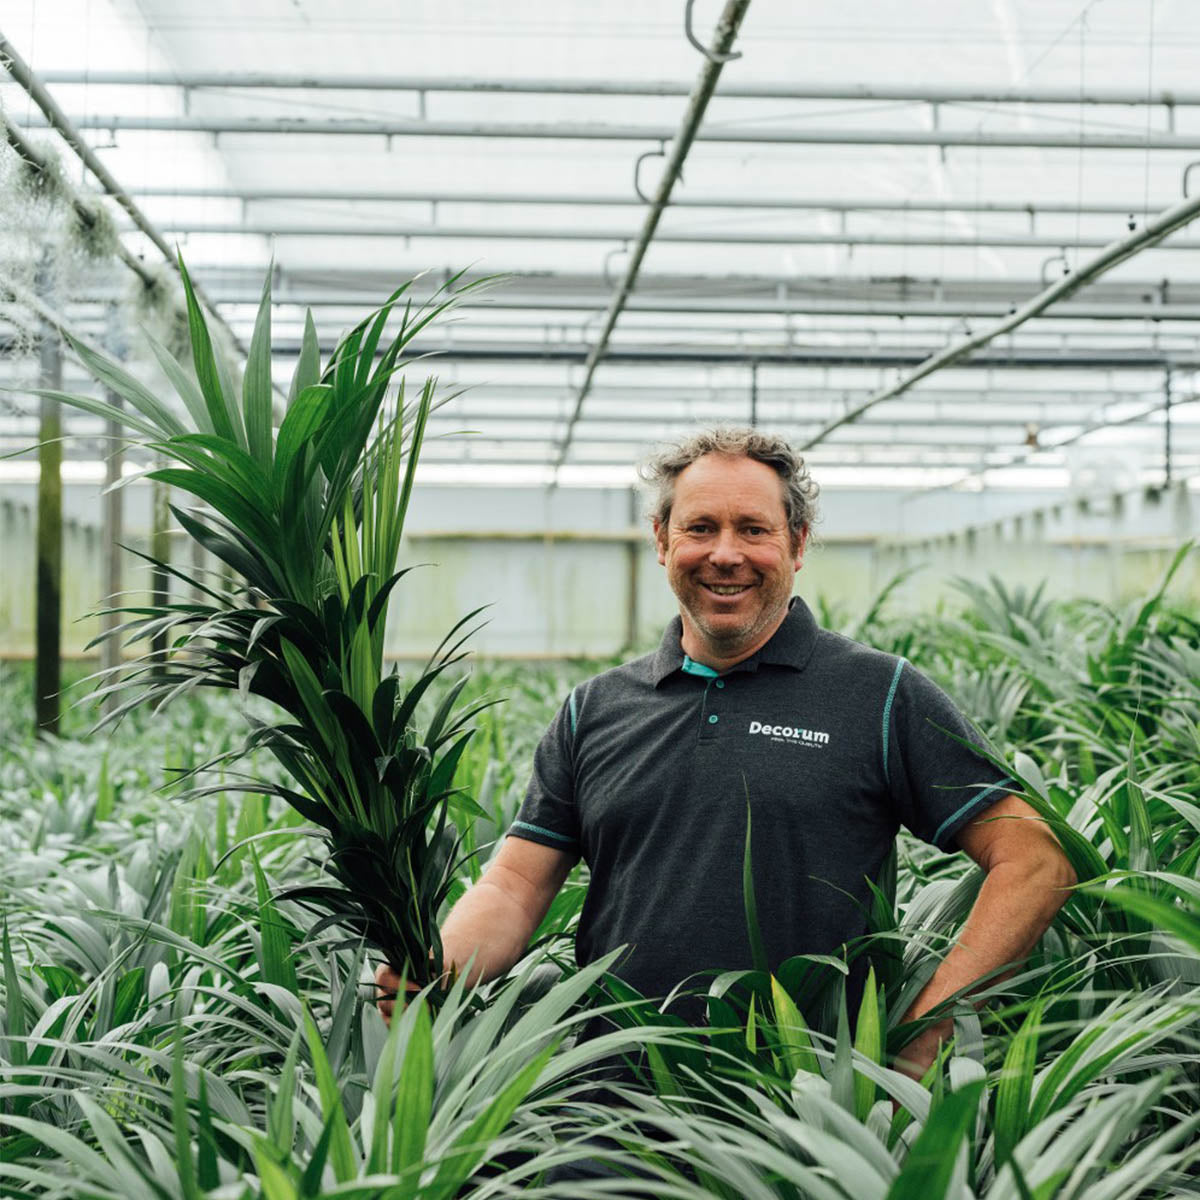 Gerrit Stolze holding a plant in his greenhouse